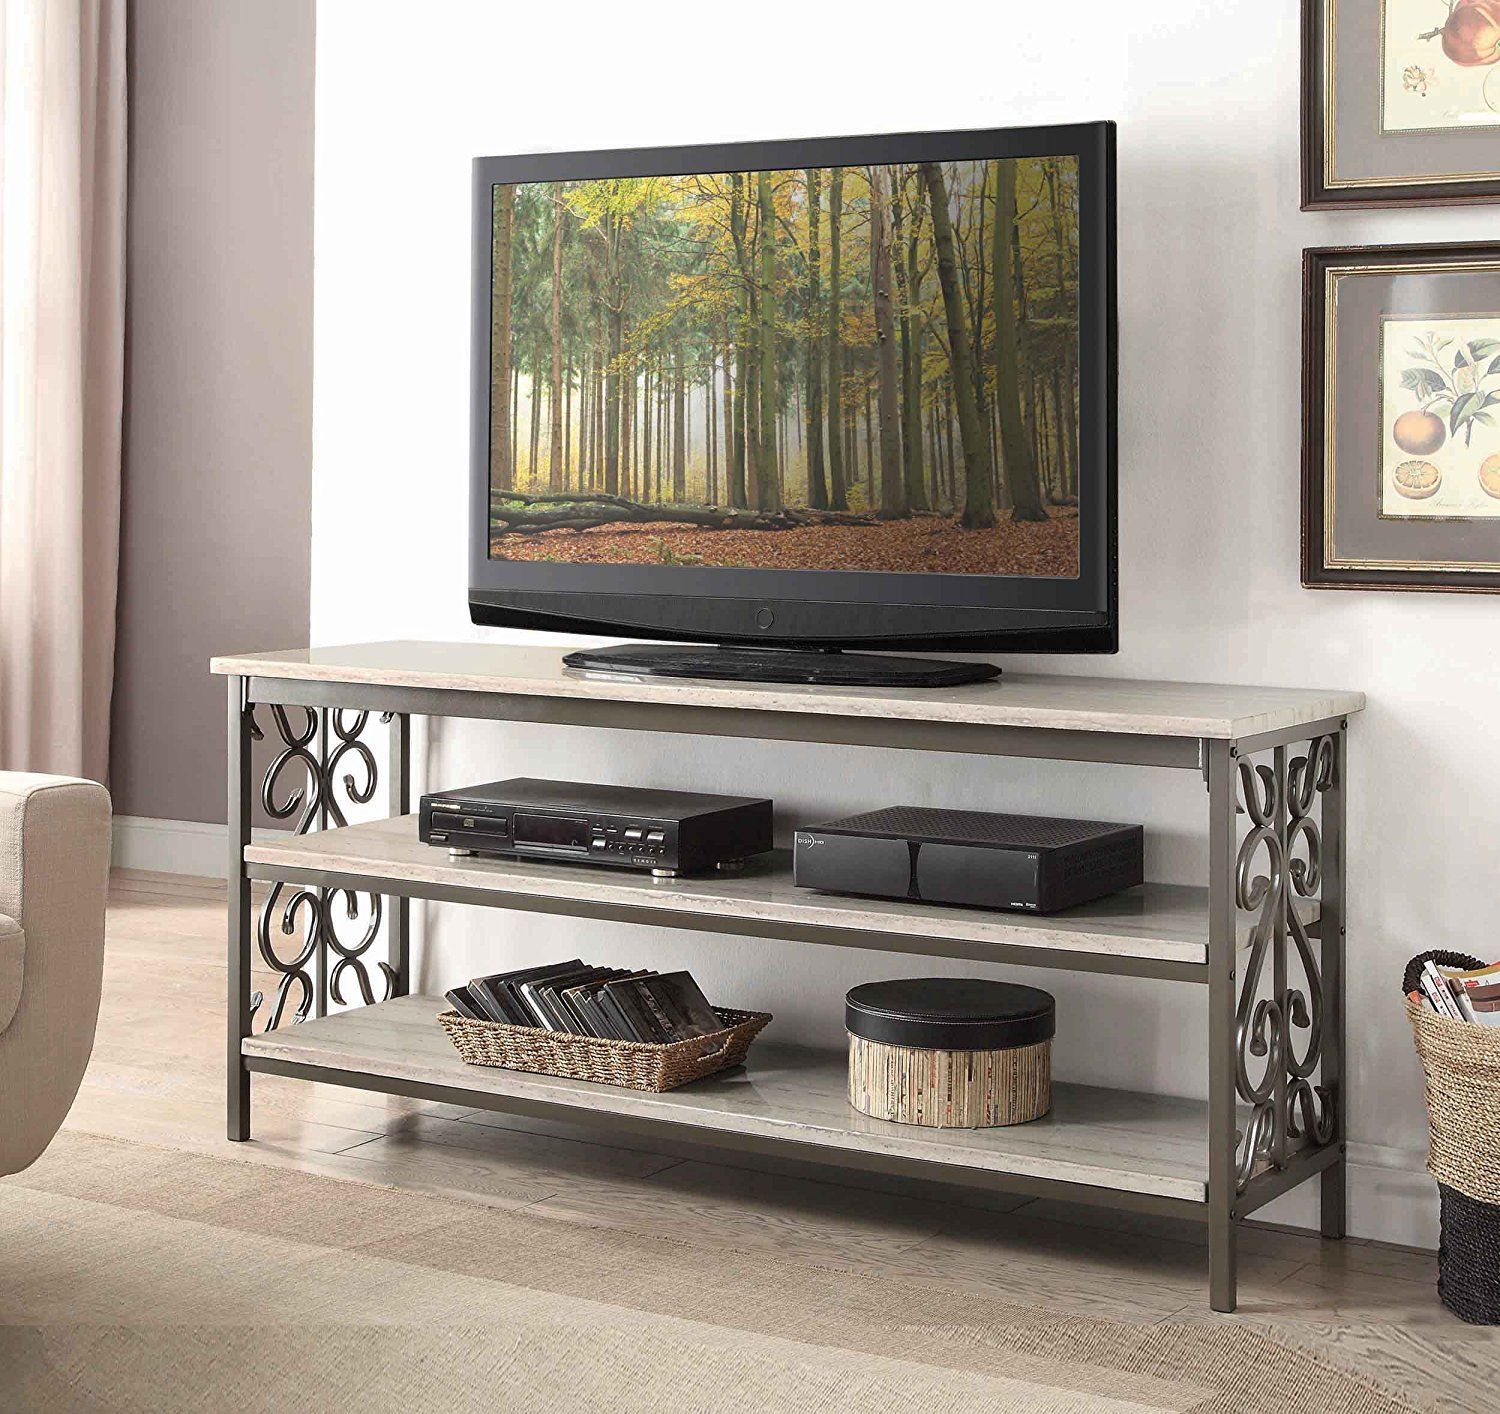 Amazon: Homelegance Fairhope Faux Marble Top Tv Stand With With Regard To Black Marble Tv Stands (Gallery 18 of 20)